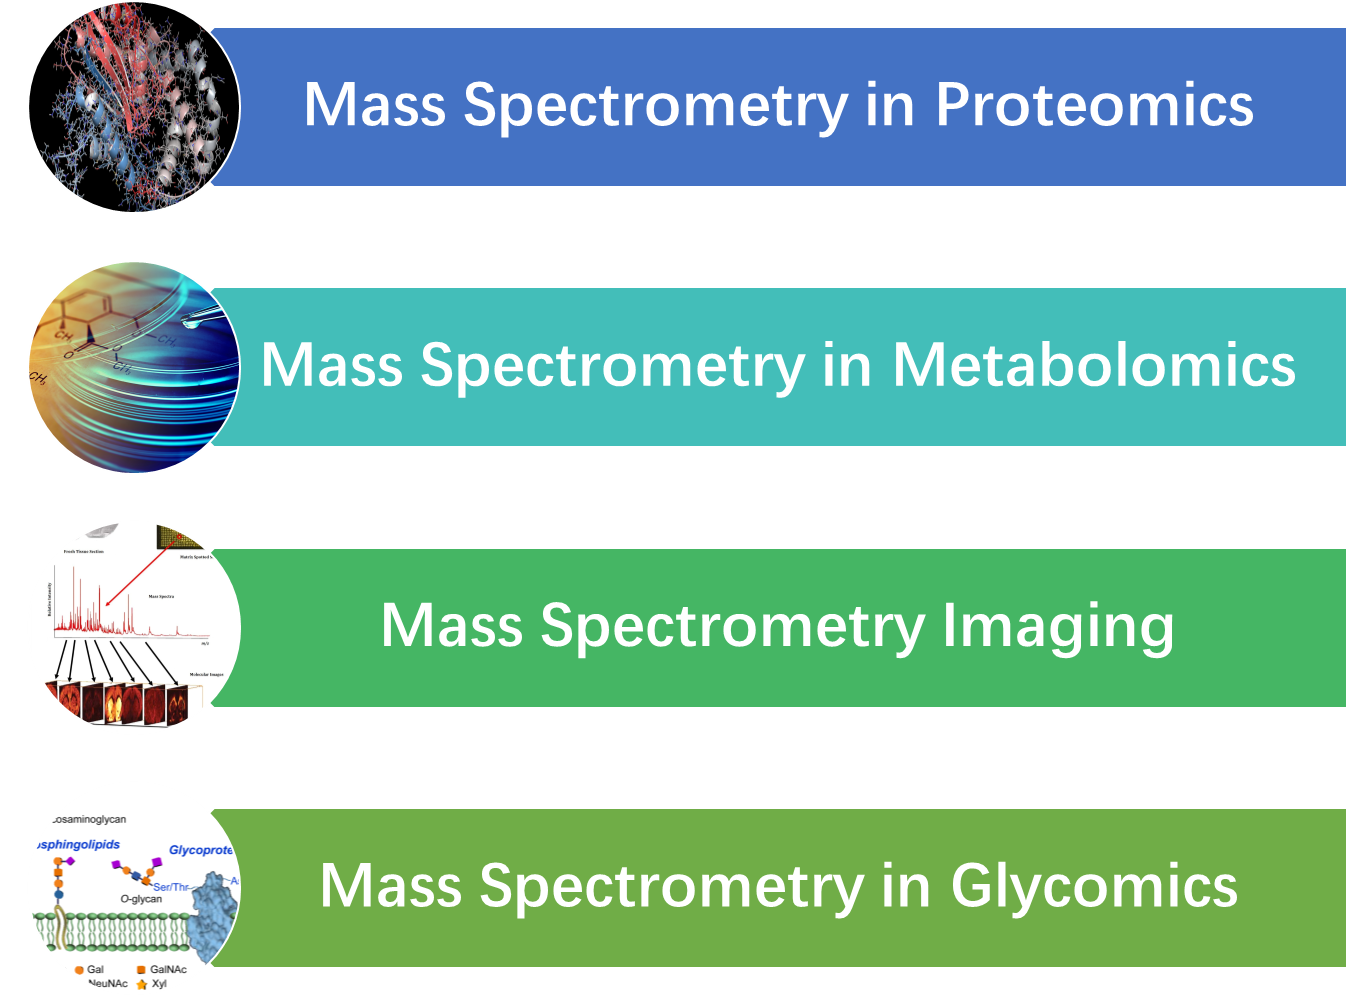 Applications of Mass Spectrometry